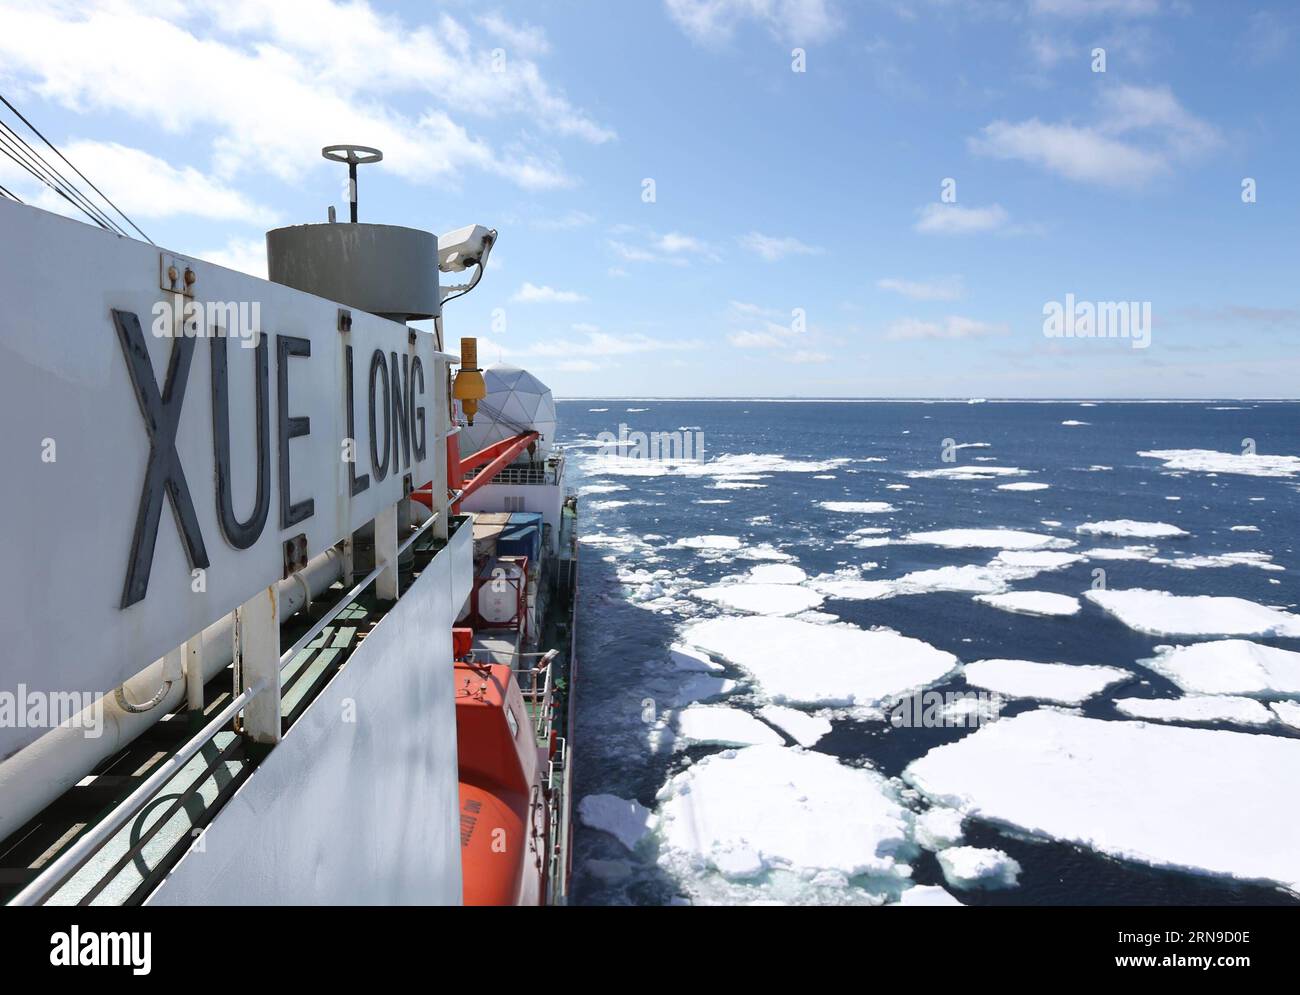 151129) -- XUELONG ICEBREAKER, Nov., 2015 -- Photo taken from Chinese  icebreaker Xuelong , meaning Snow Dragon in English, shows floating ice on  her journey to Antarctica. Xuelong crossed westerlies and reached